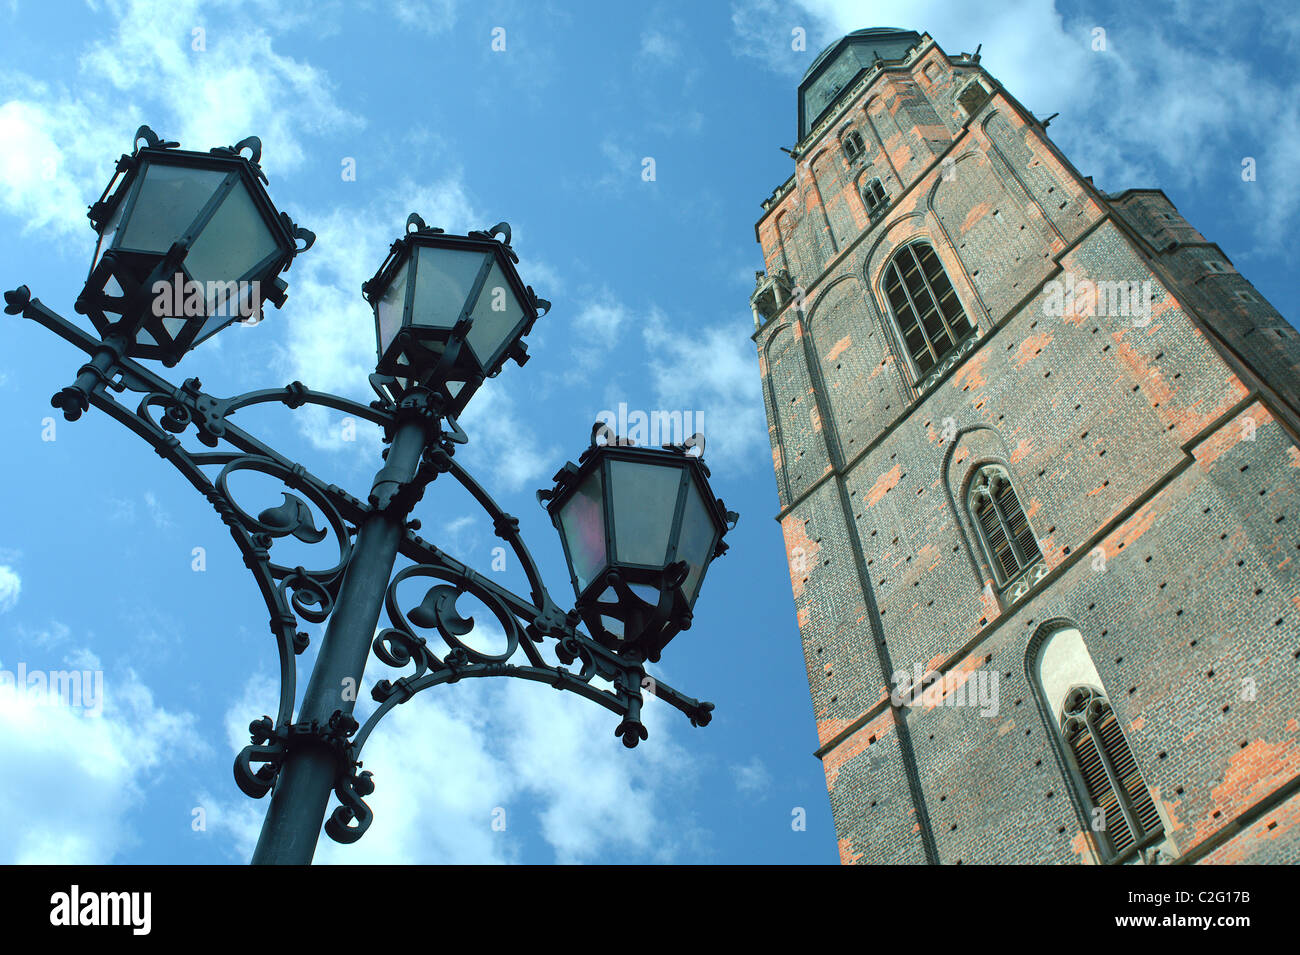 Gothic tower of Saint Elizabeth's church and the street lamp Wroclaw Poland Stock Photo